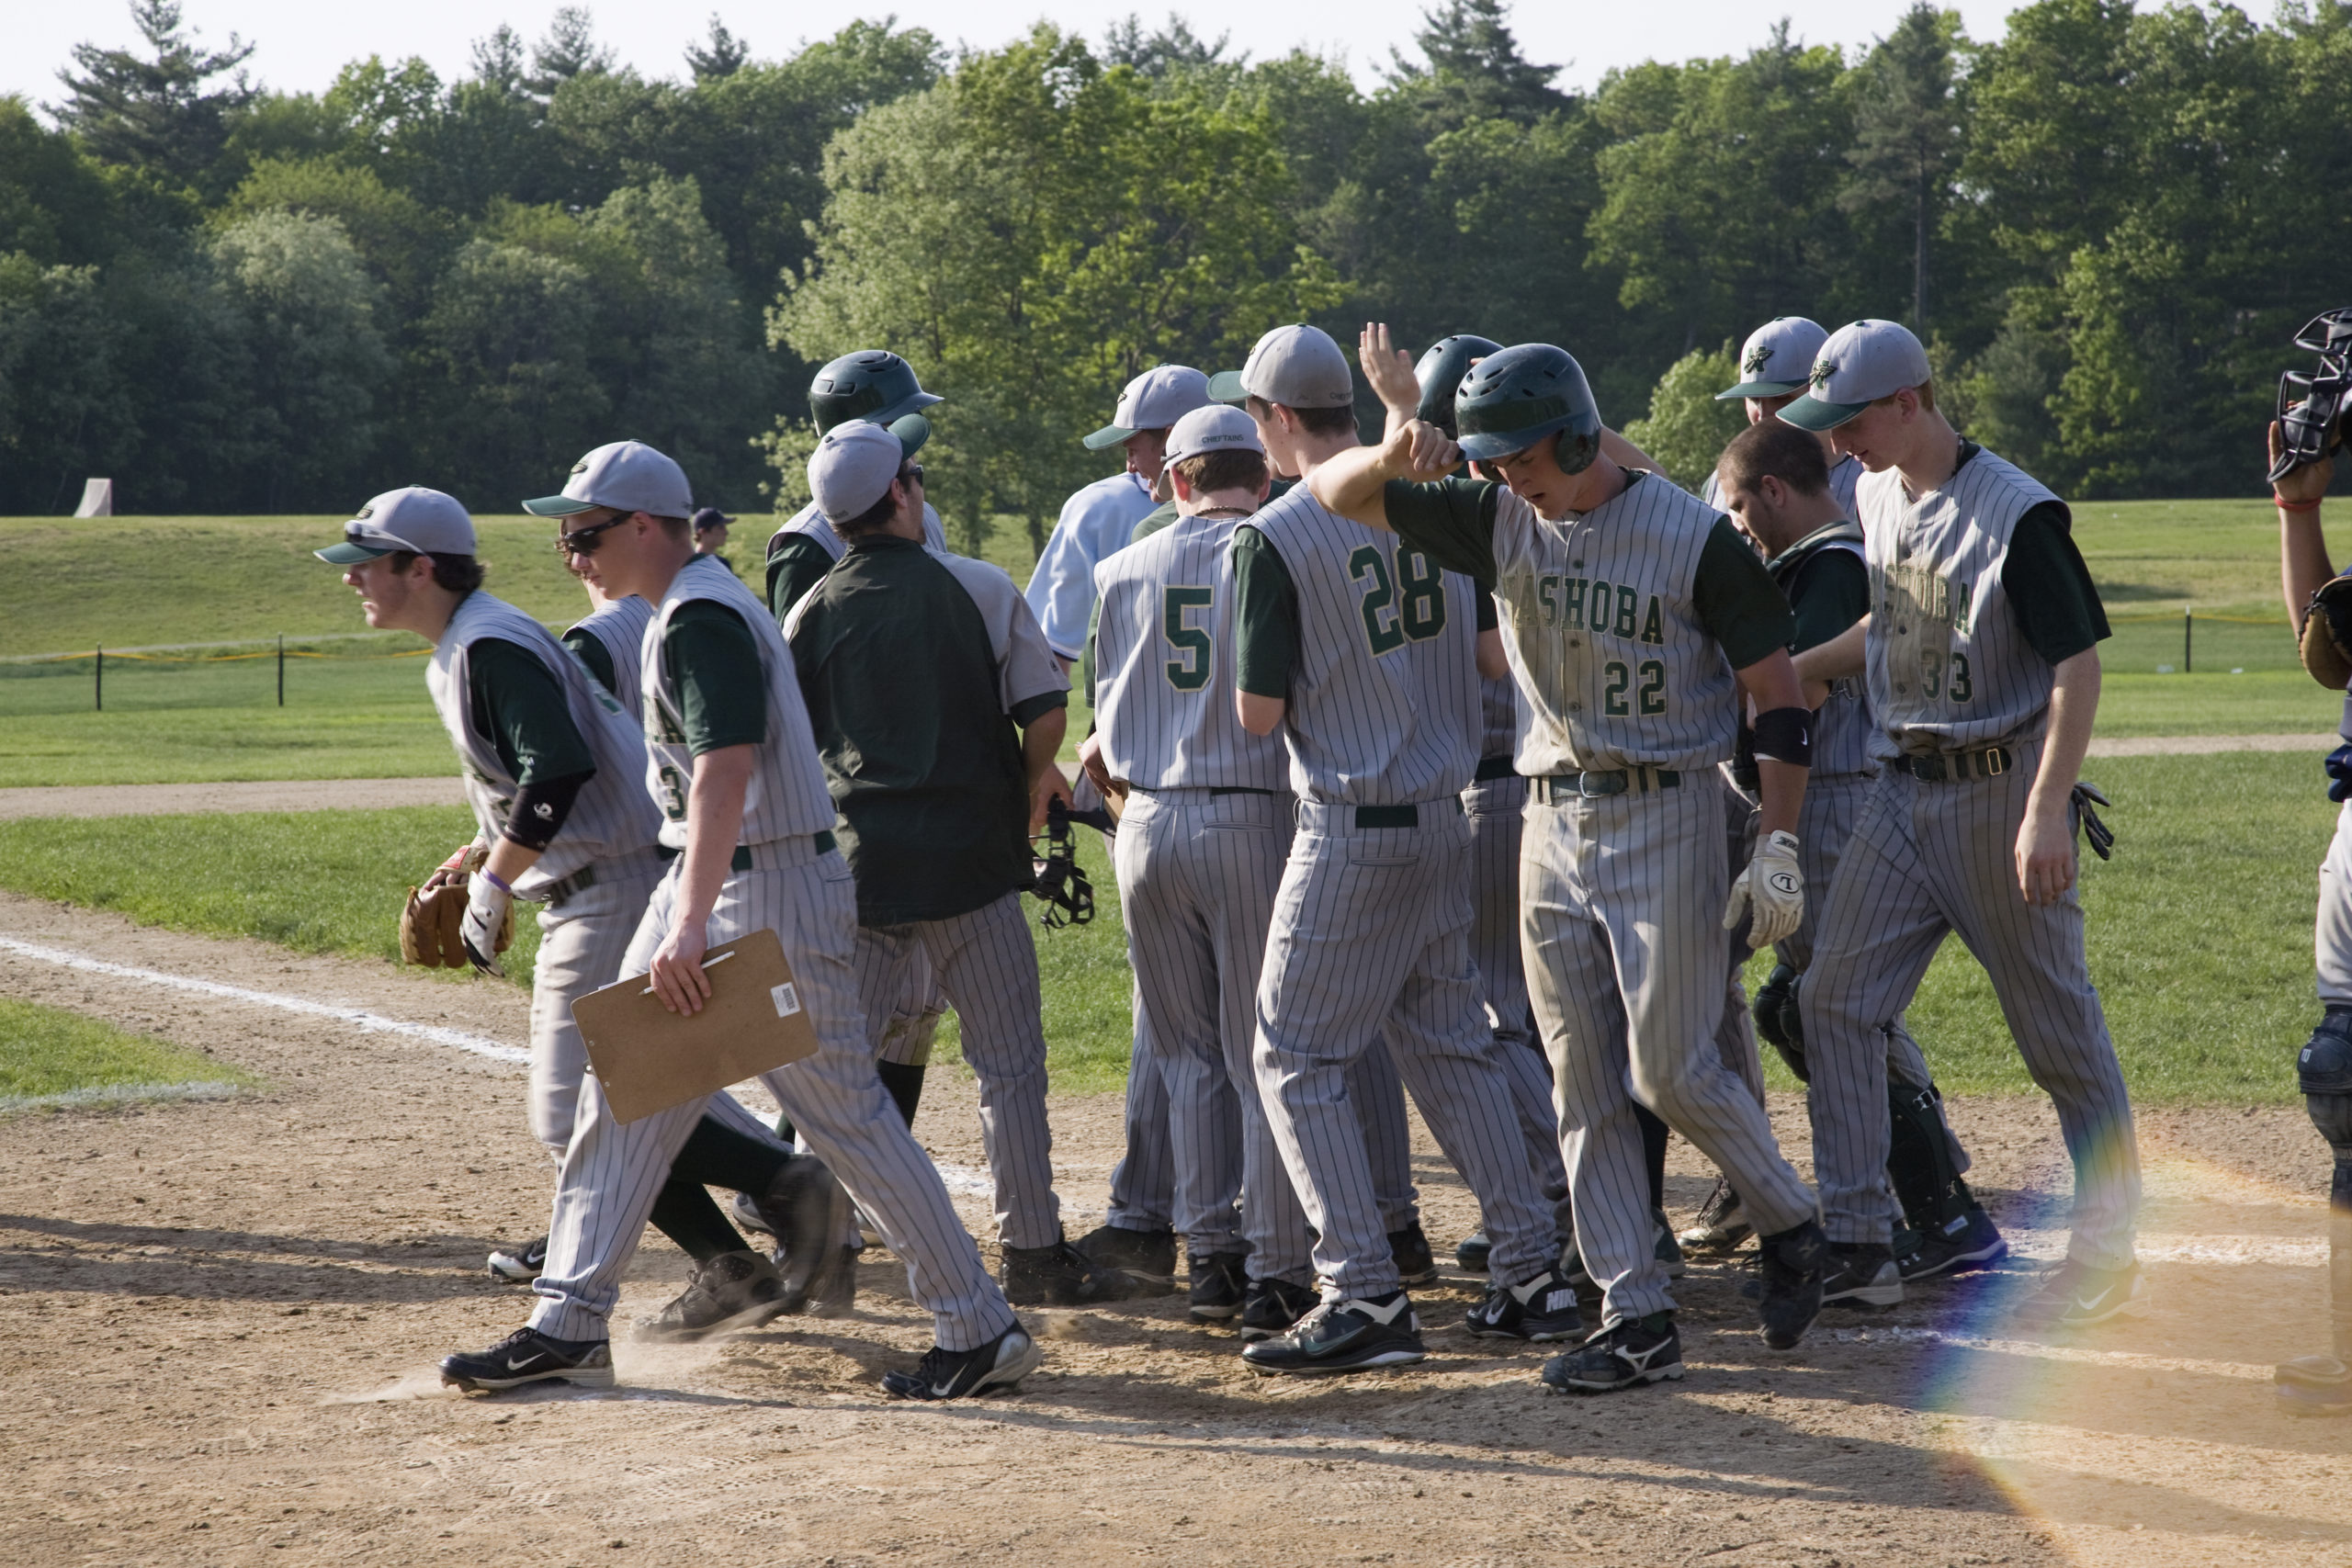 A travel ball team breaks from a huddle before starting a baseball game. 